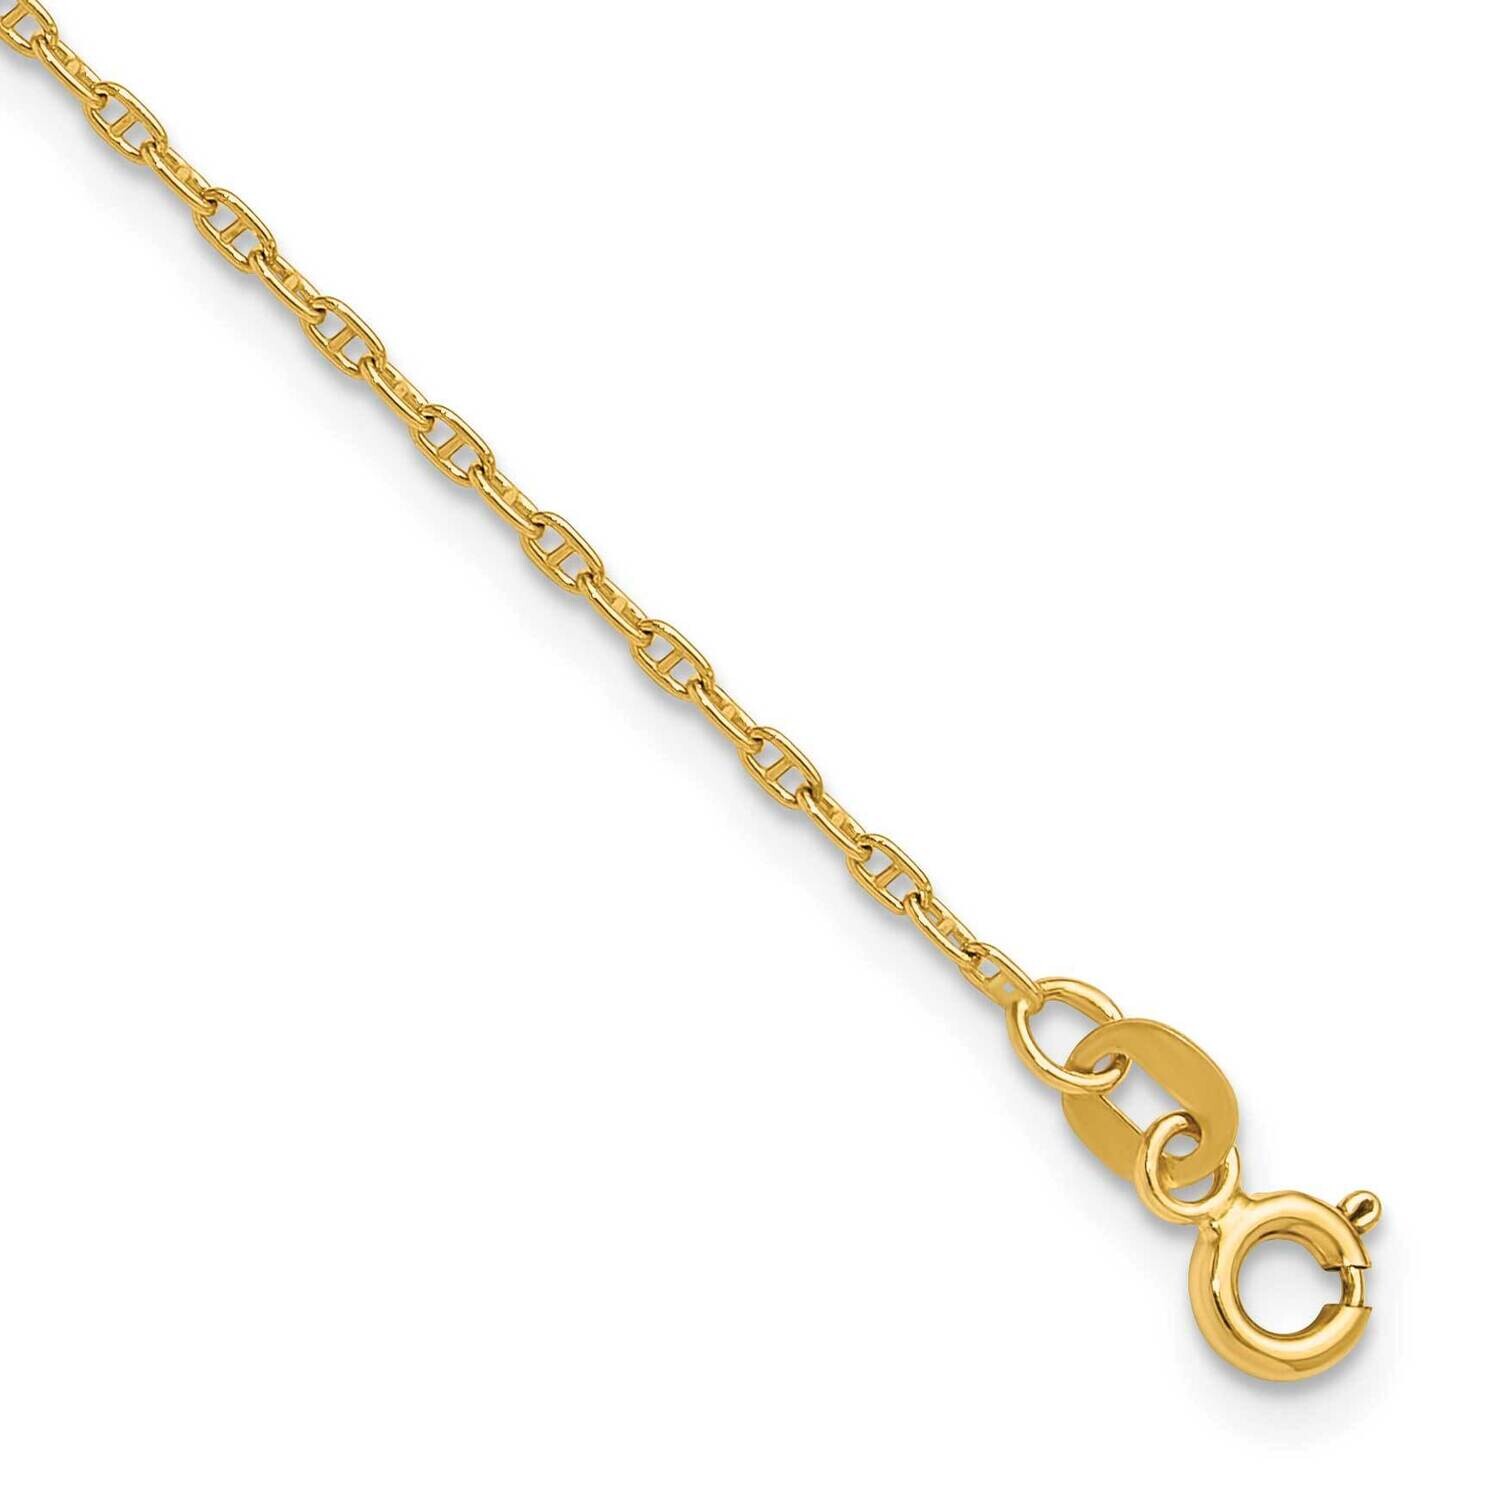 1.5mm Mariners Link Chain 10 Inch 14k Gold MA040-10